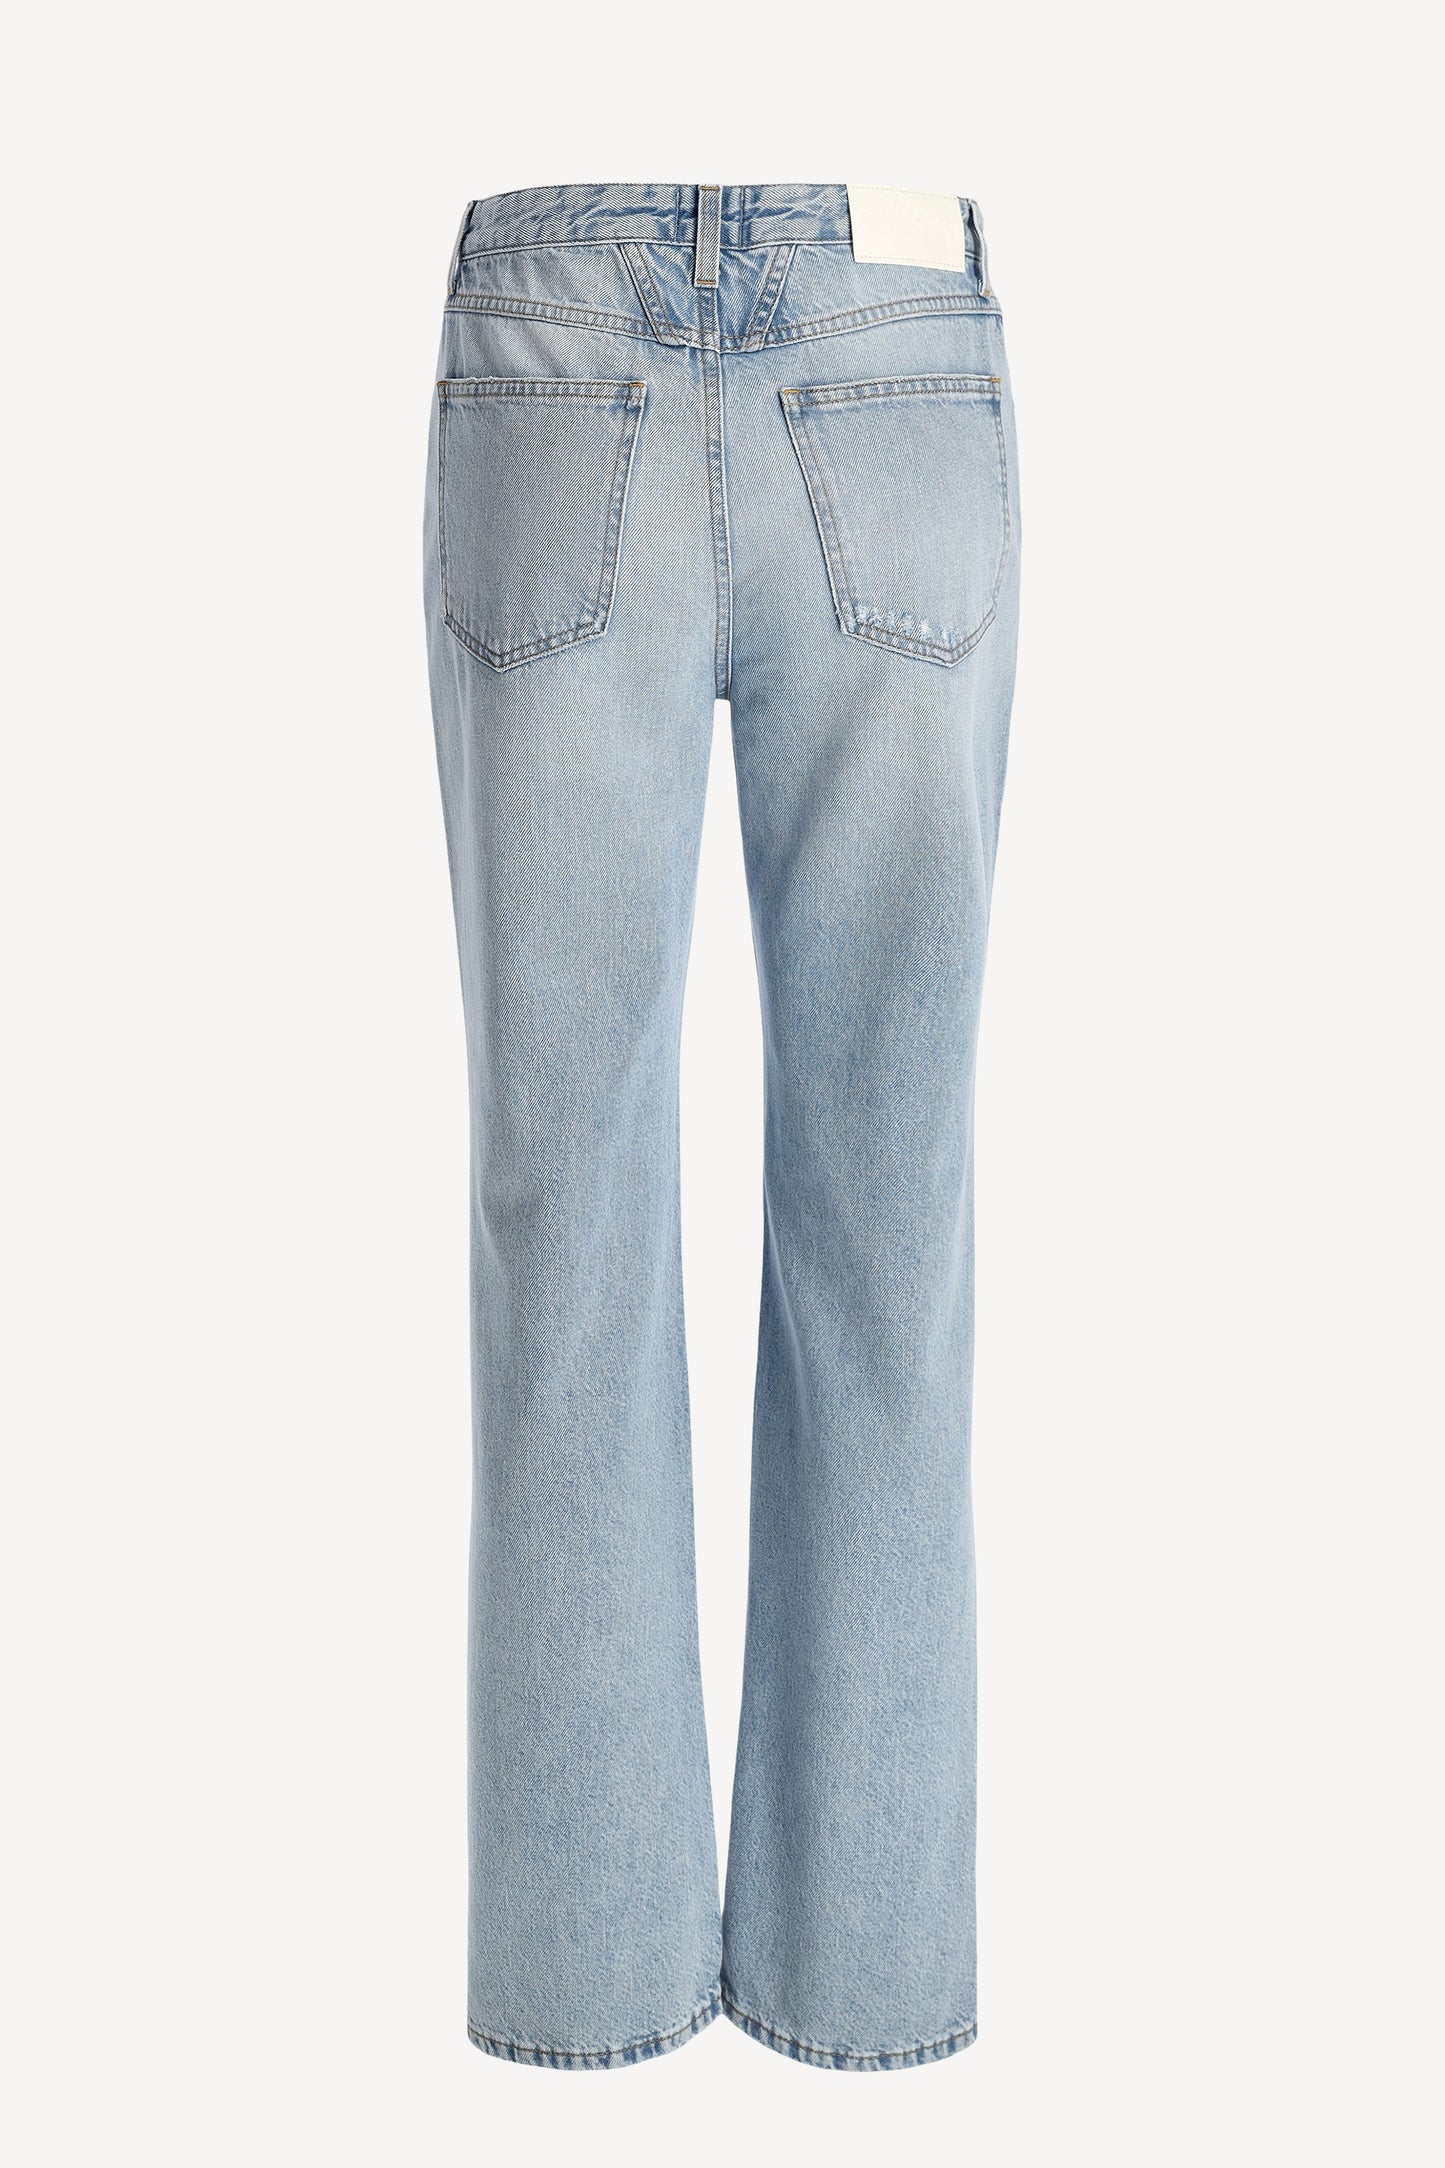 Jeans Roan in Light BlueClosed - Anita Hass